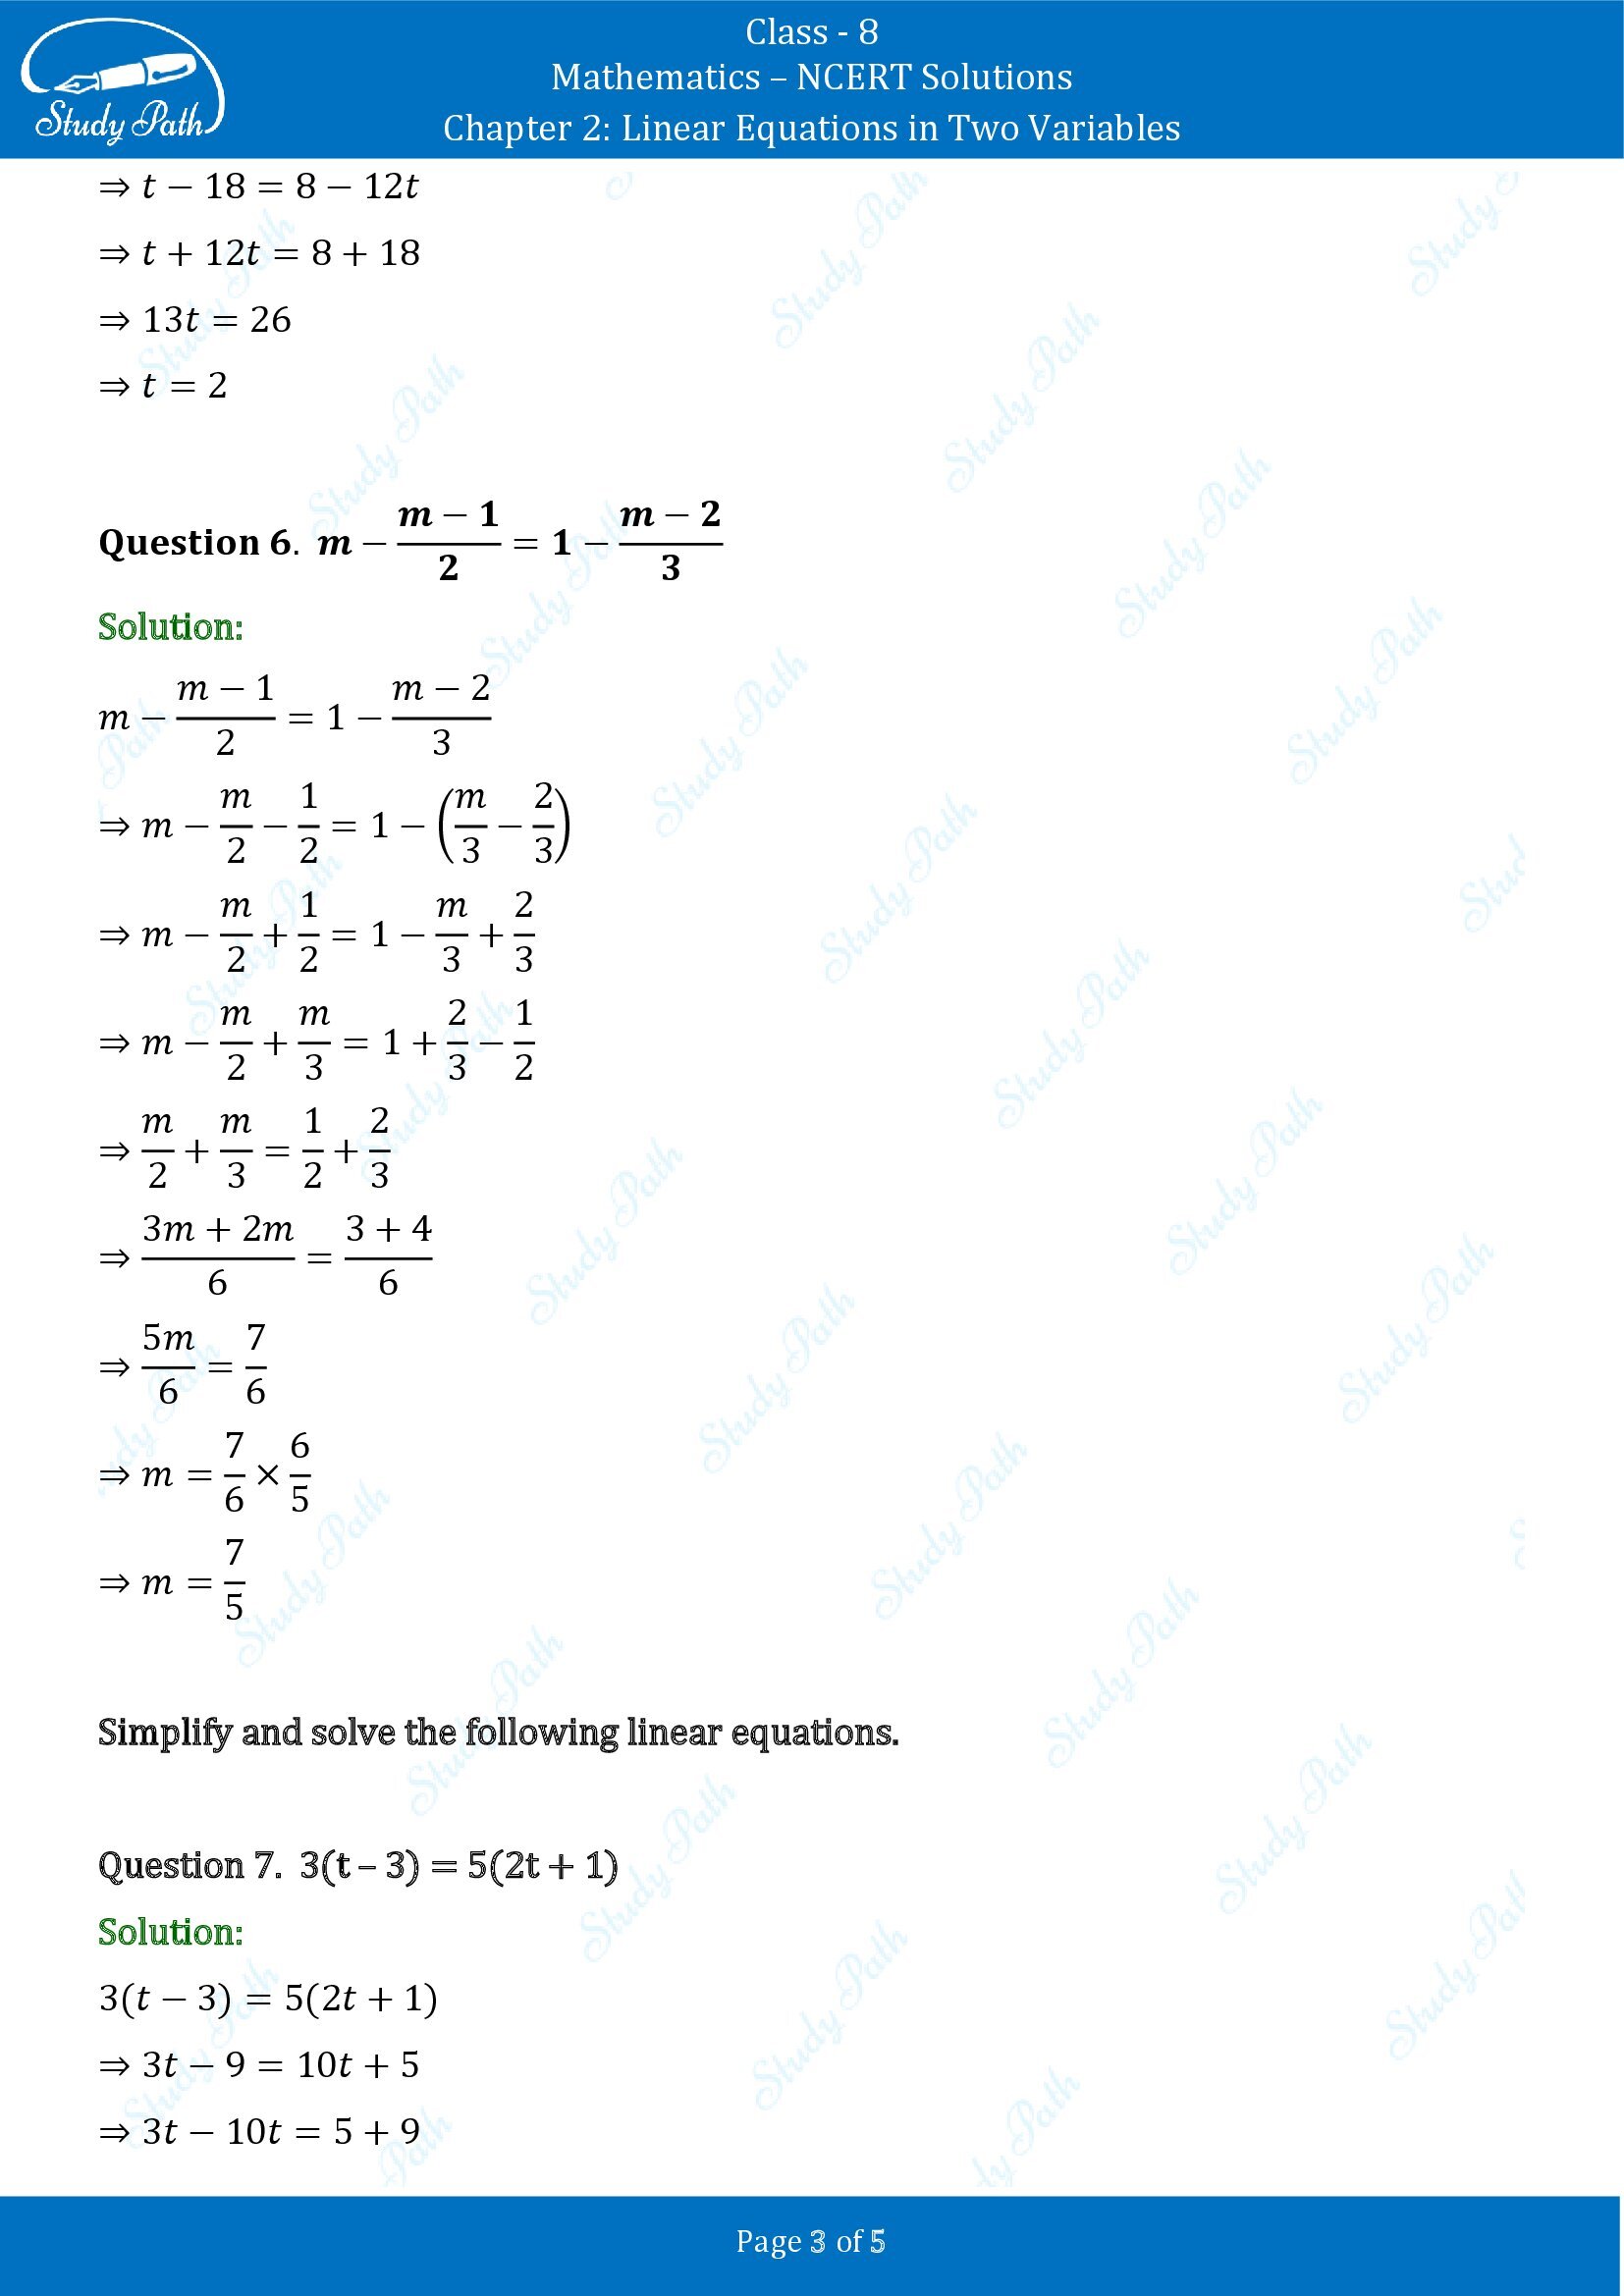 NCERT Solutions for Class 8 Maths Chapter 2 Linear Equations in Two Variables Exercise 2.5 00003